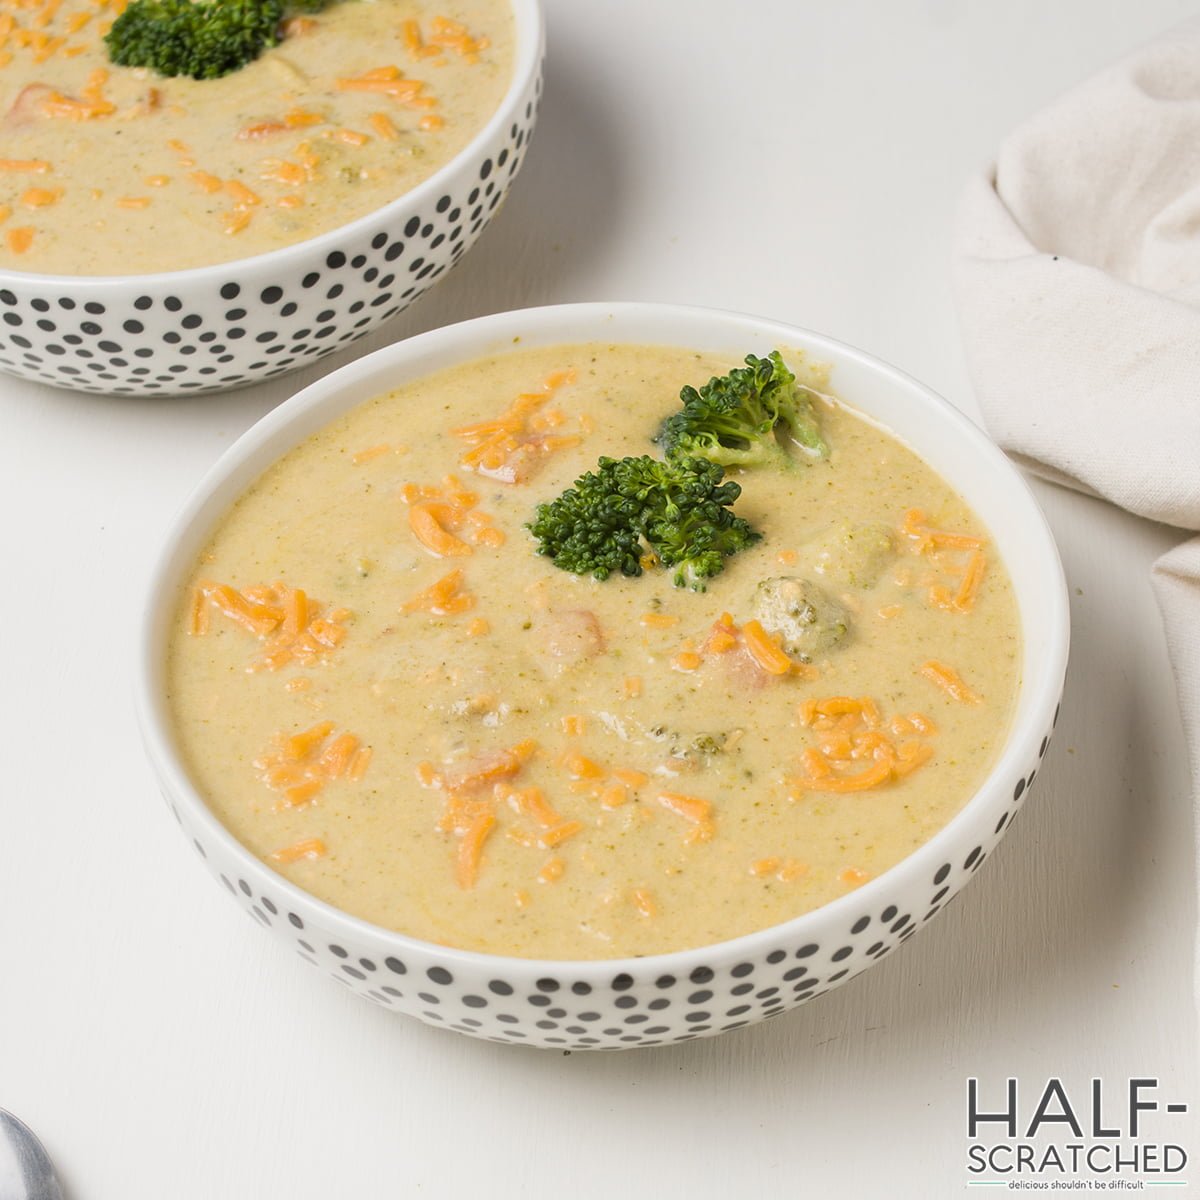 Overview of a bowl with broccoli and cheddar soup